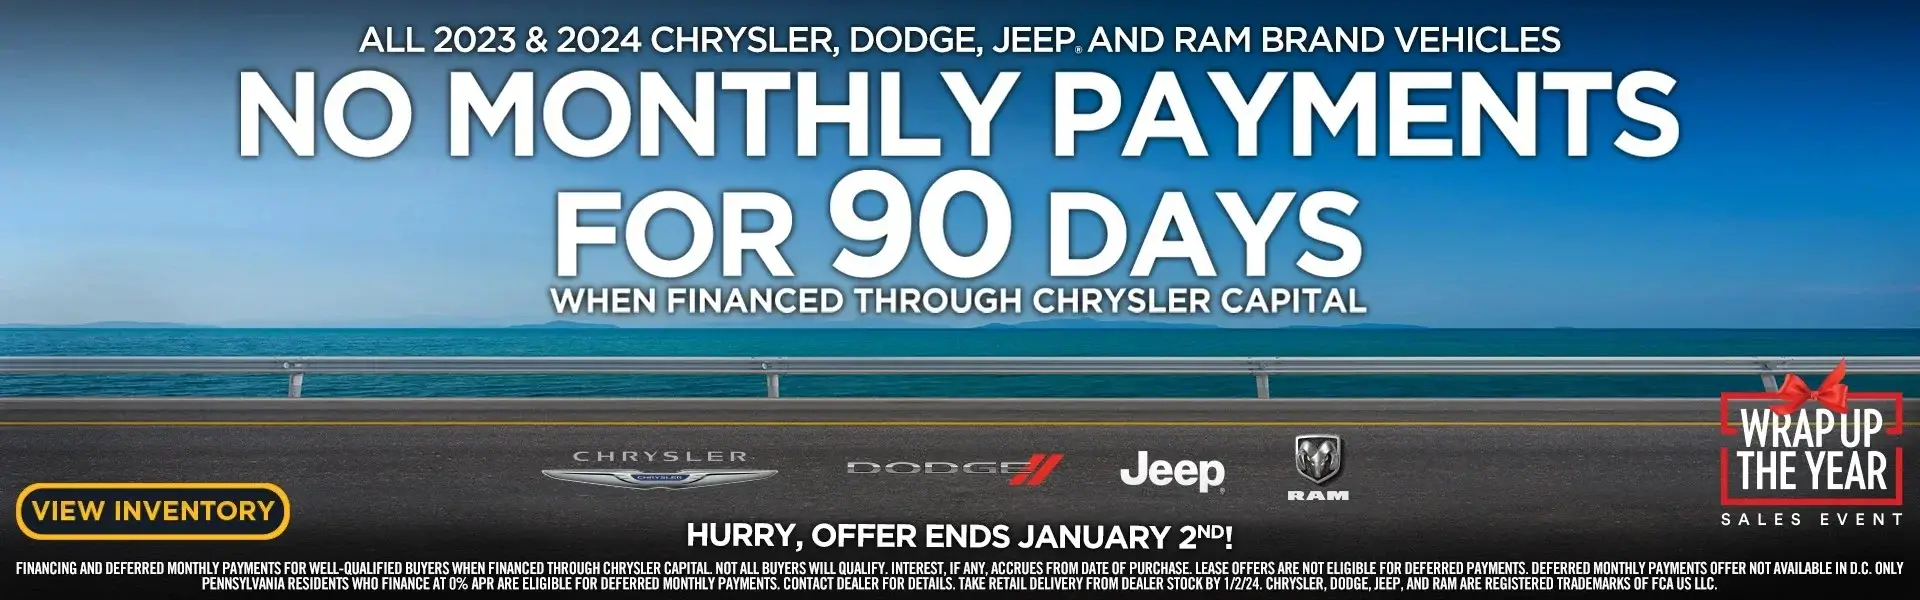 No Monthly Payments for 90 Days CDJR